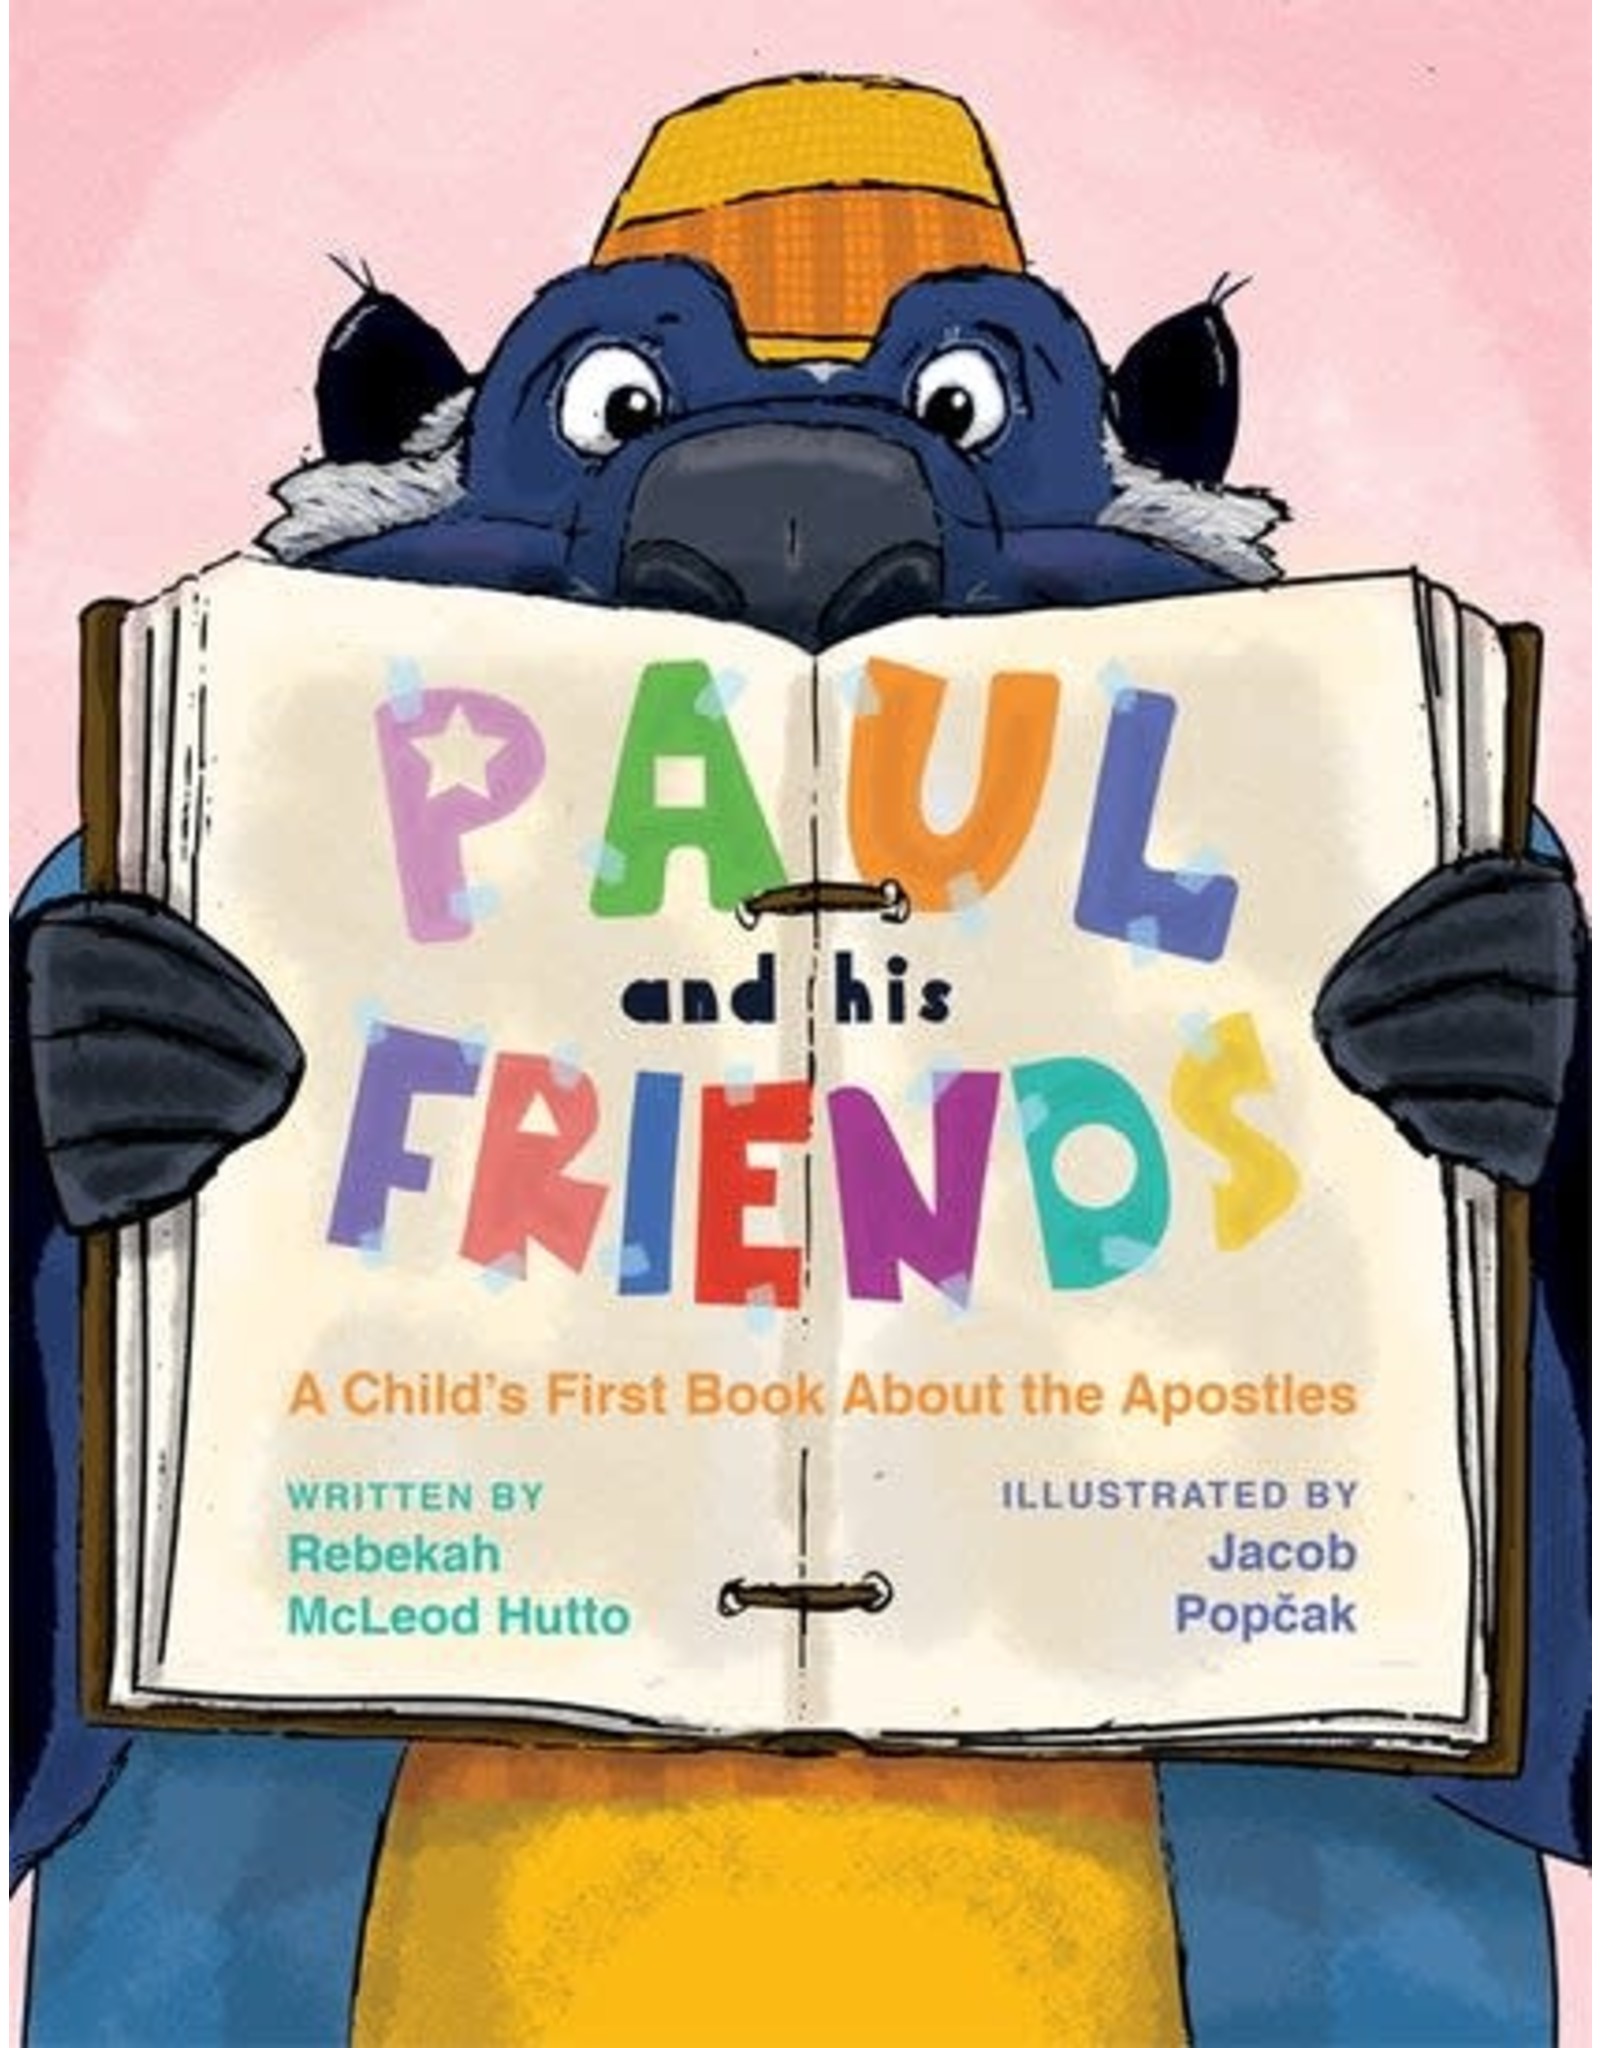 Paul and His Friends: A Child's First Book About the Apostles